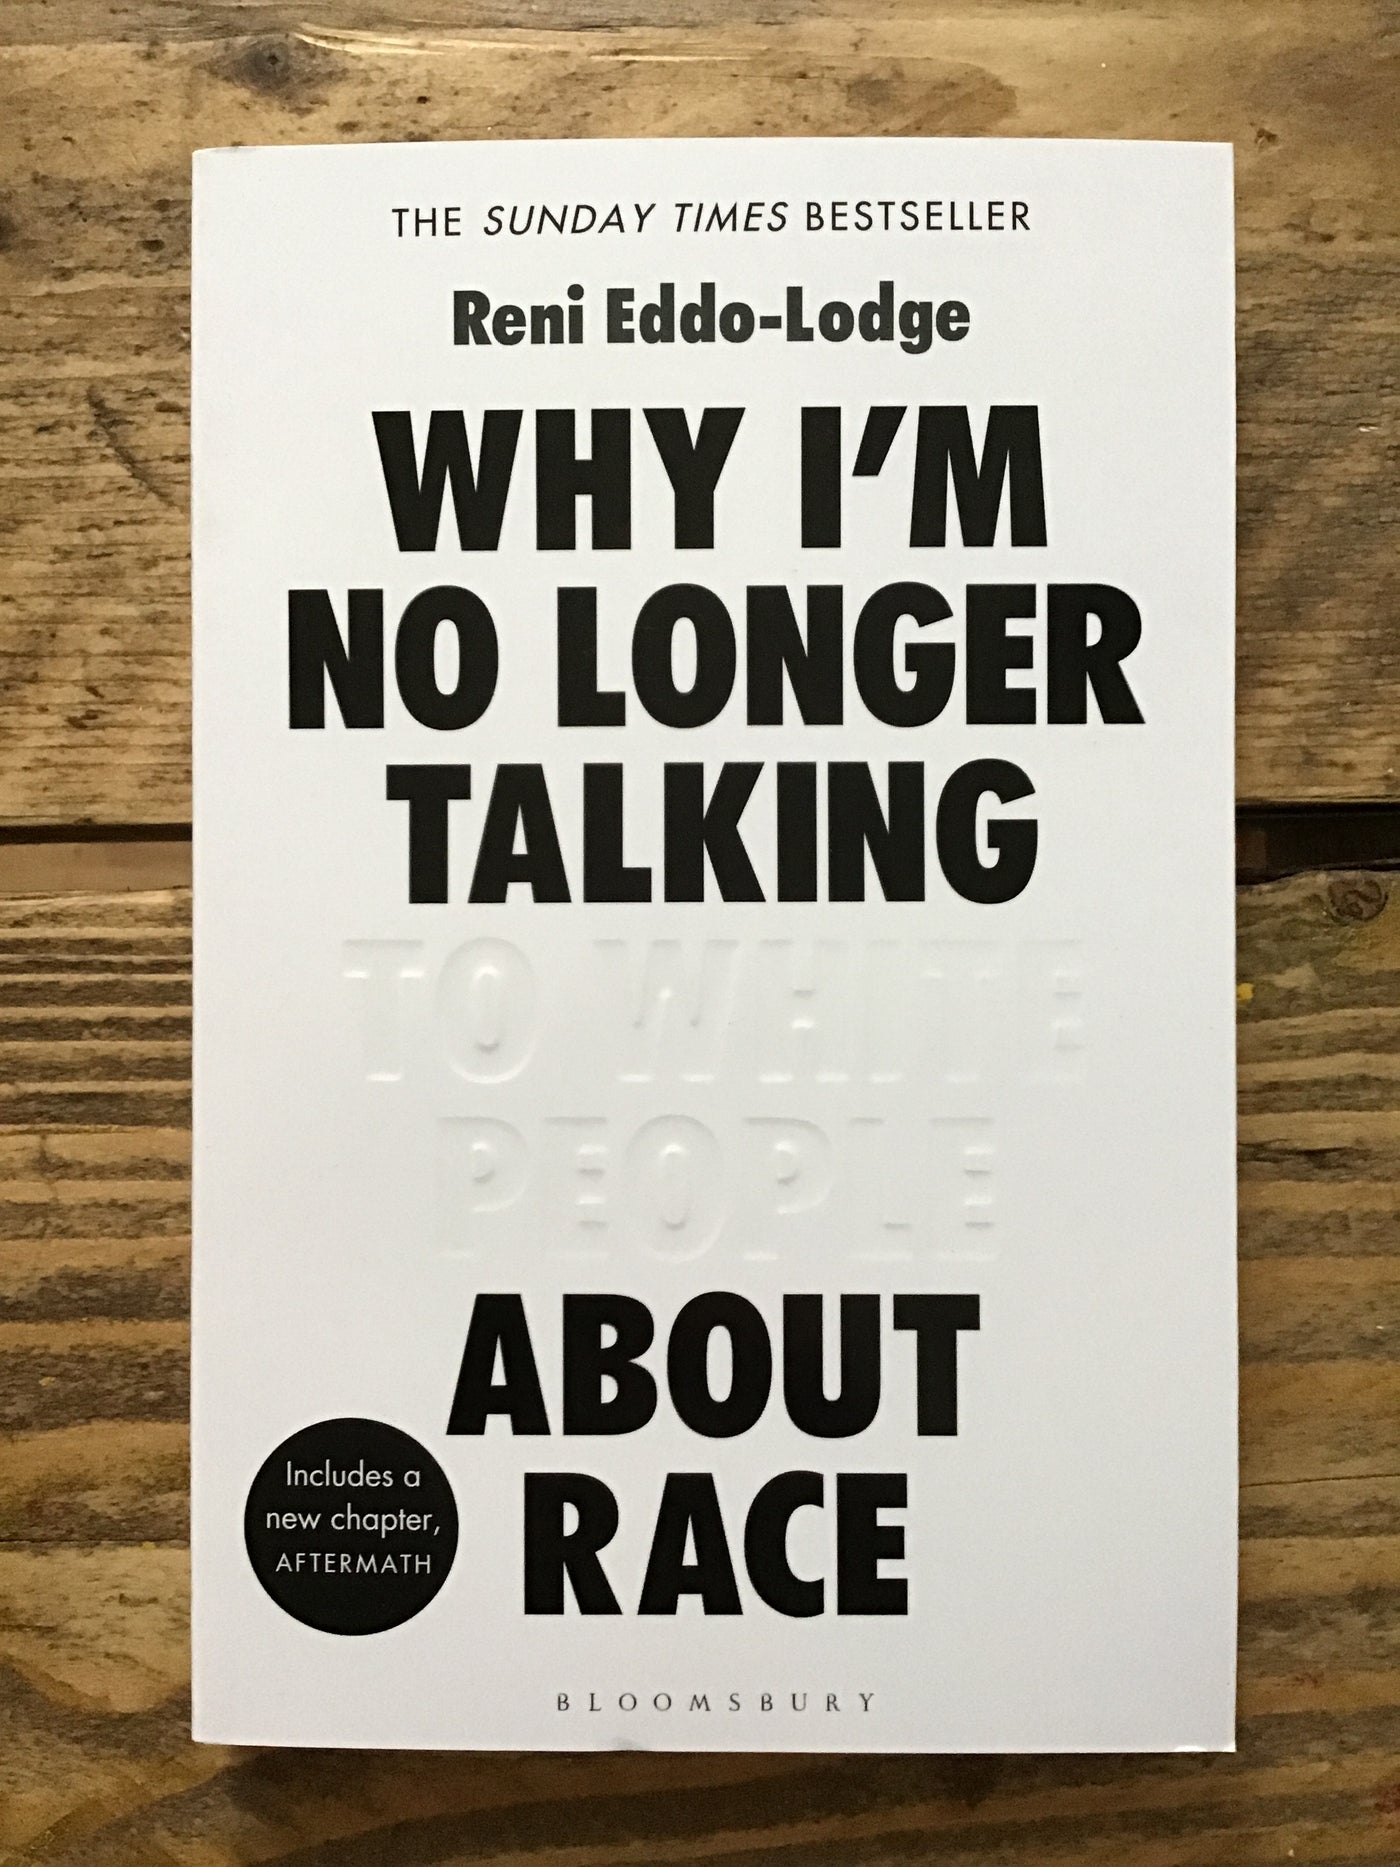 Why I'm No Longer Talking to White People About Race